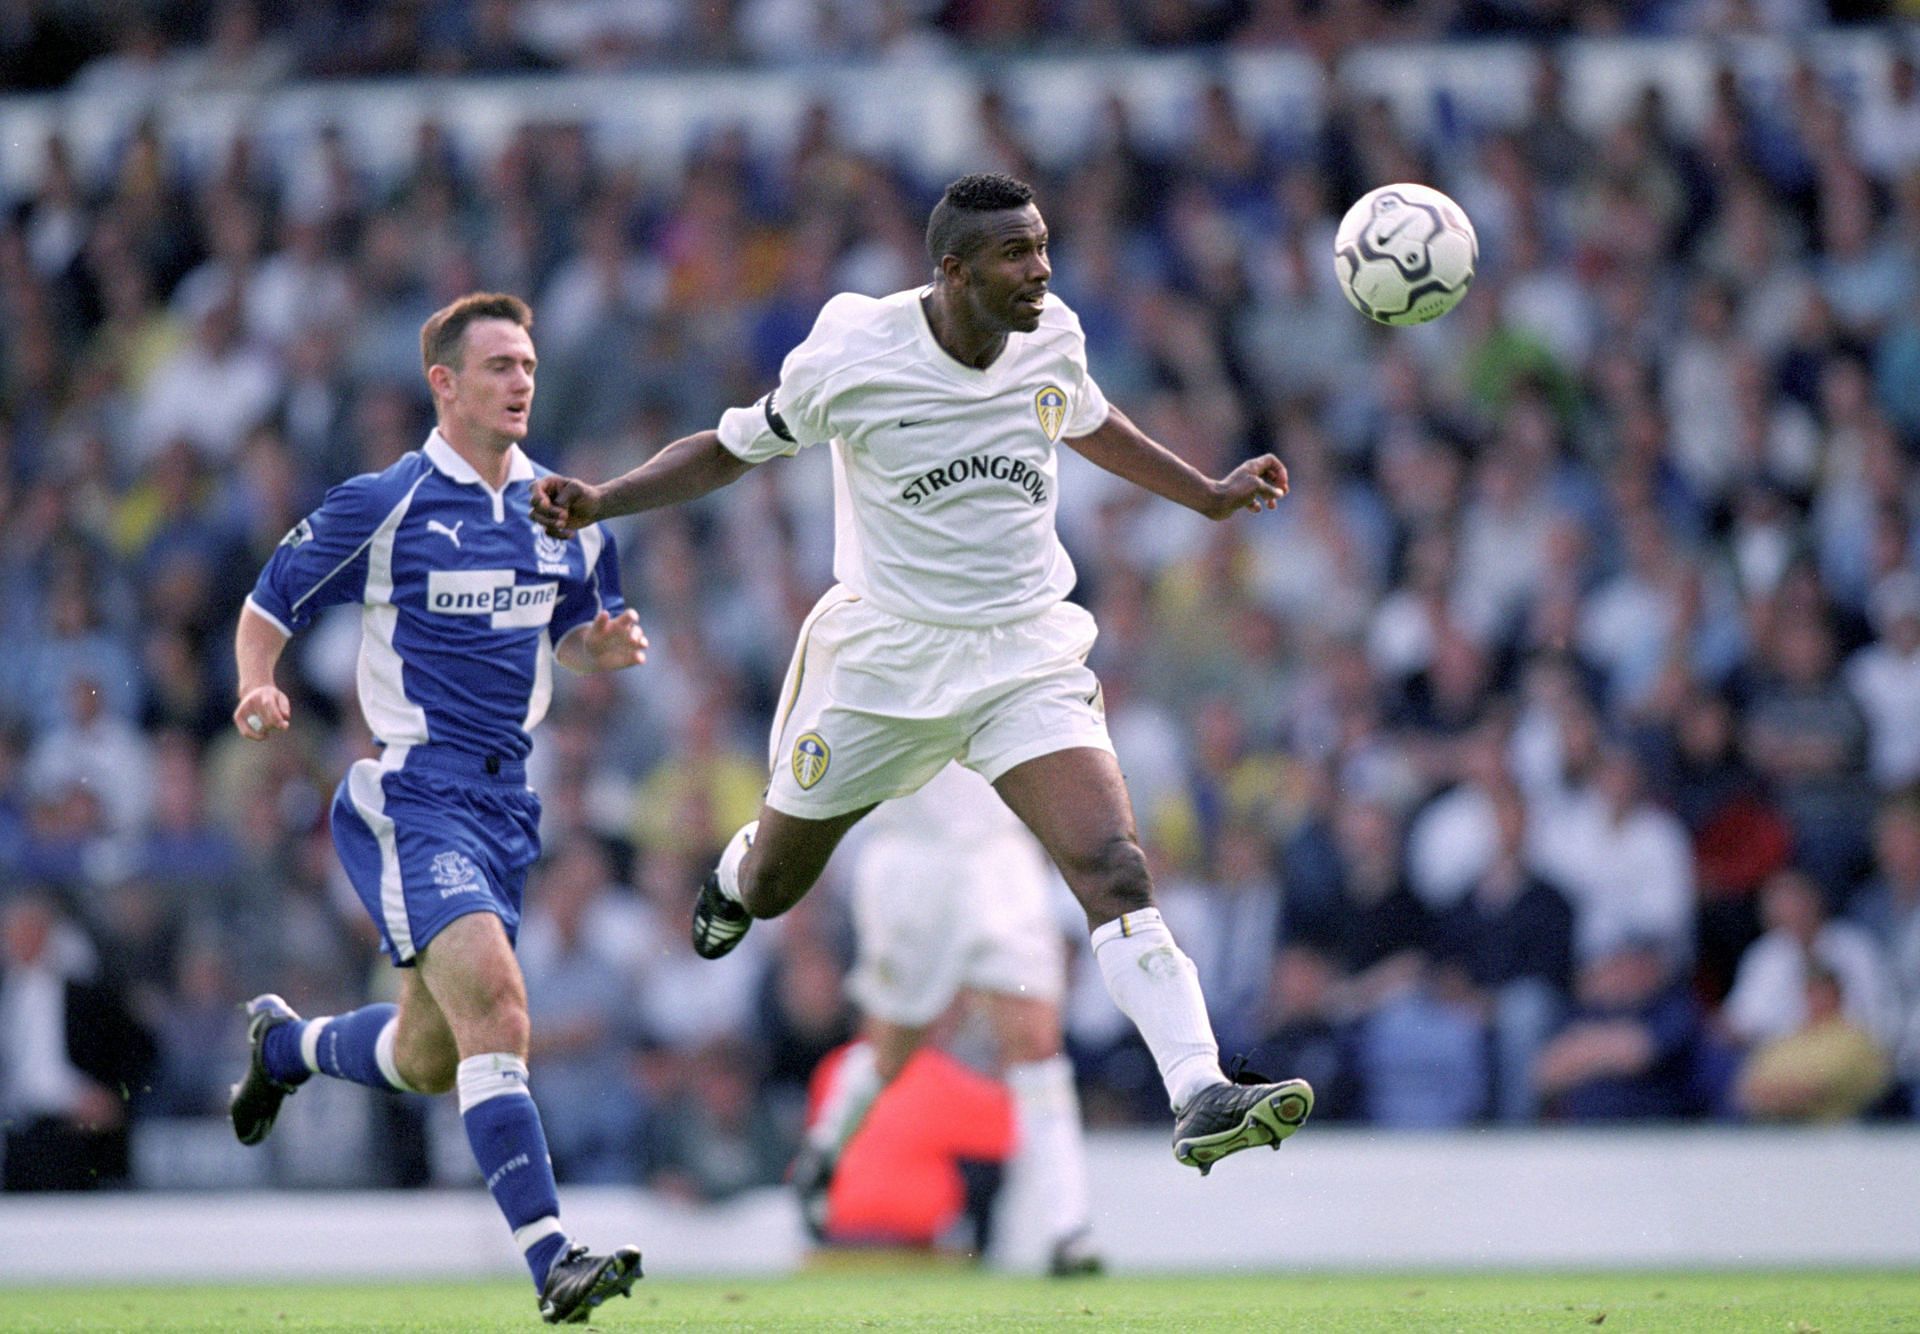 Lucas Radebe in action